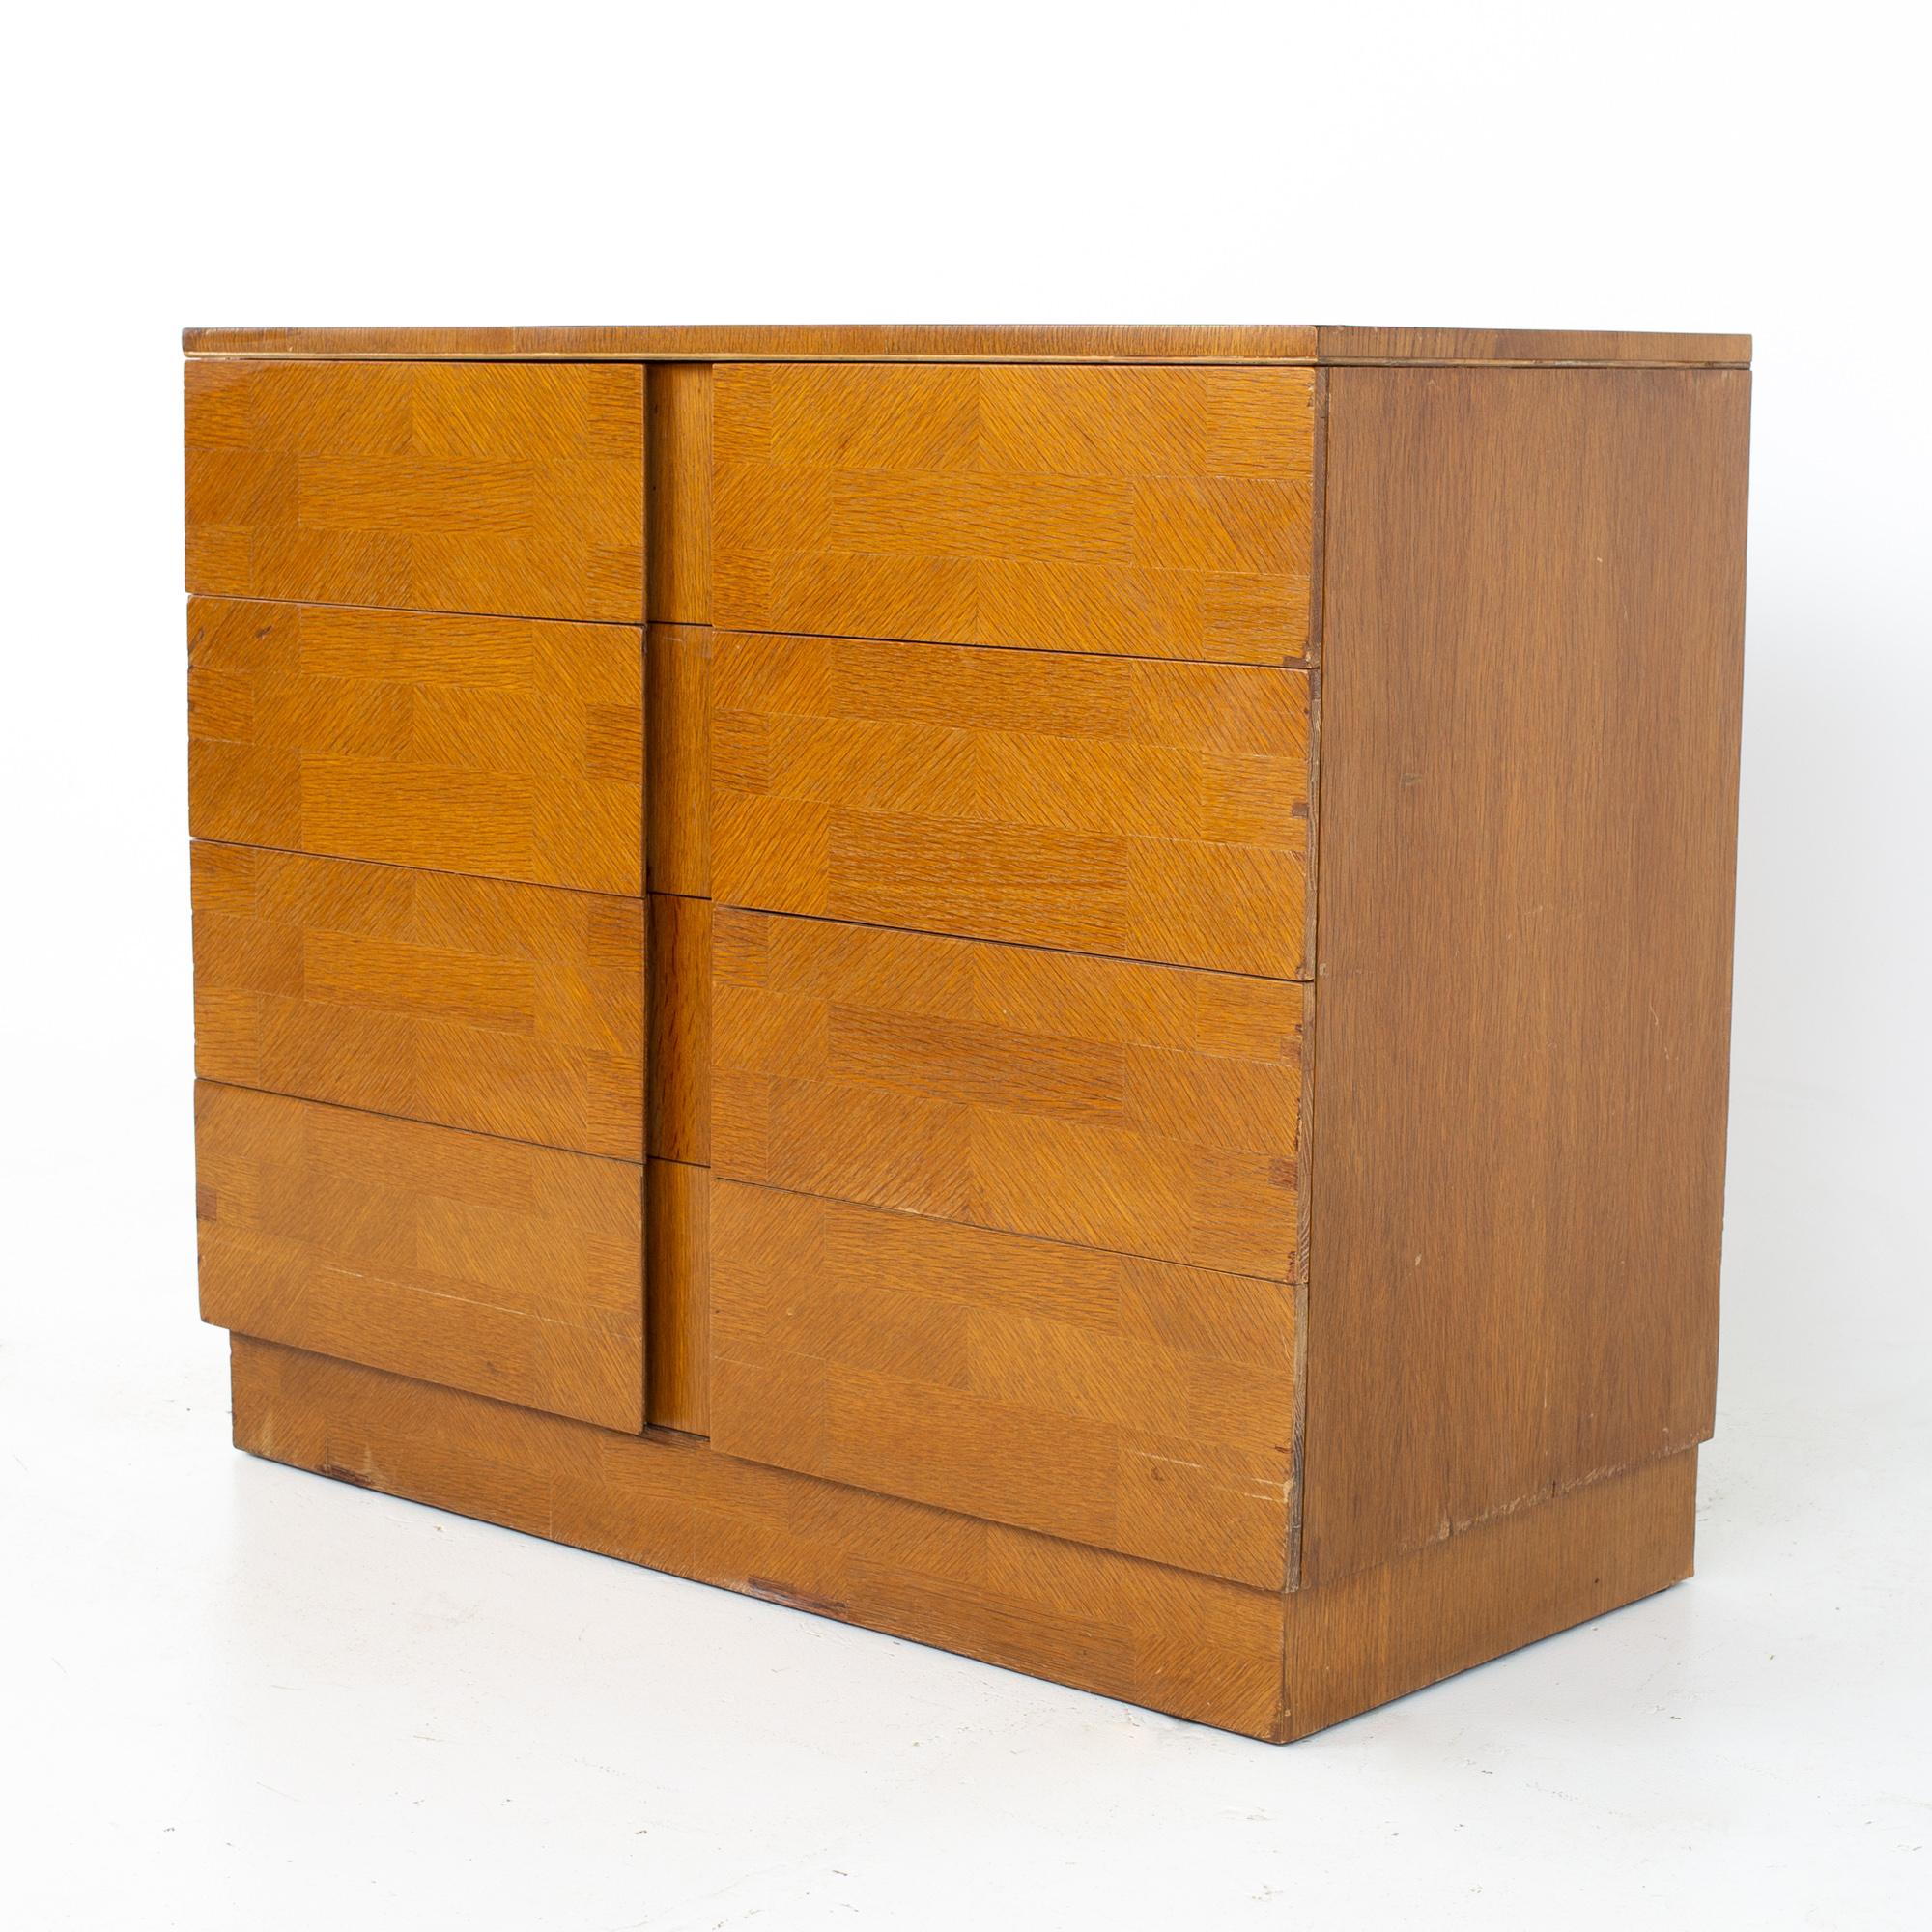 Paul McCobb style Irwin mid century blonde dresser
Dresser measures: 38 wide x 18 deep x 32 inches high

All pieces of furniture can be had in what we call restored vintage condition. That means the piece is restored upon purchase so it’s free of